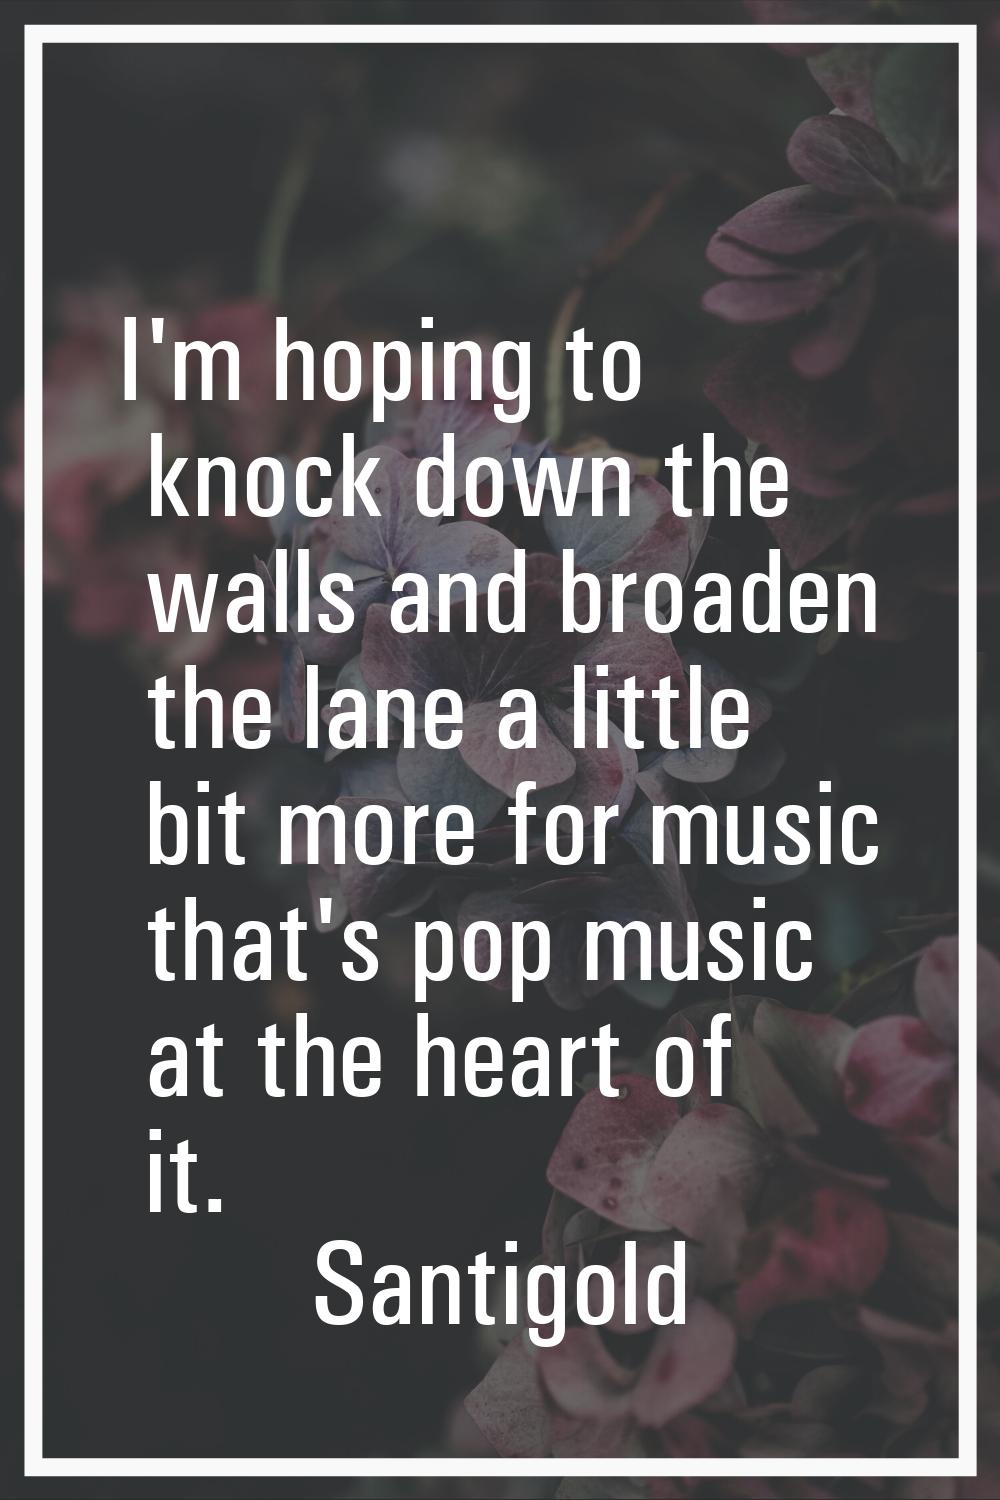 I'm hoping to knock down the walls and broaden the lane a little bit more for music that's pop musi